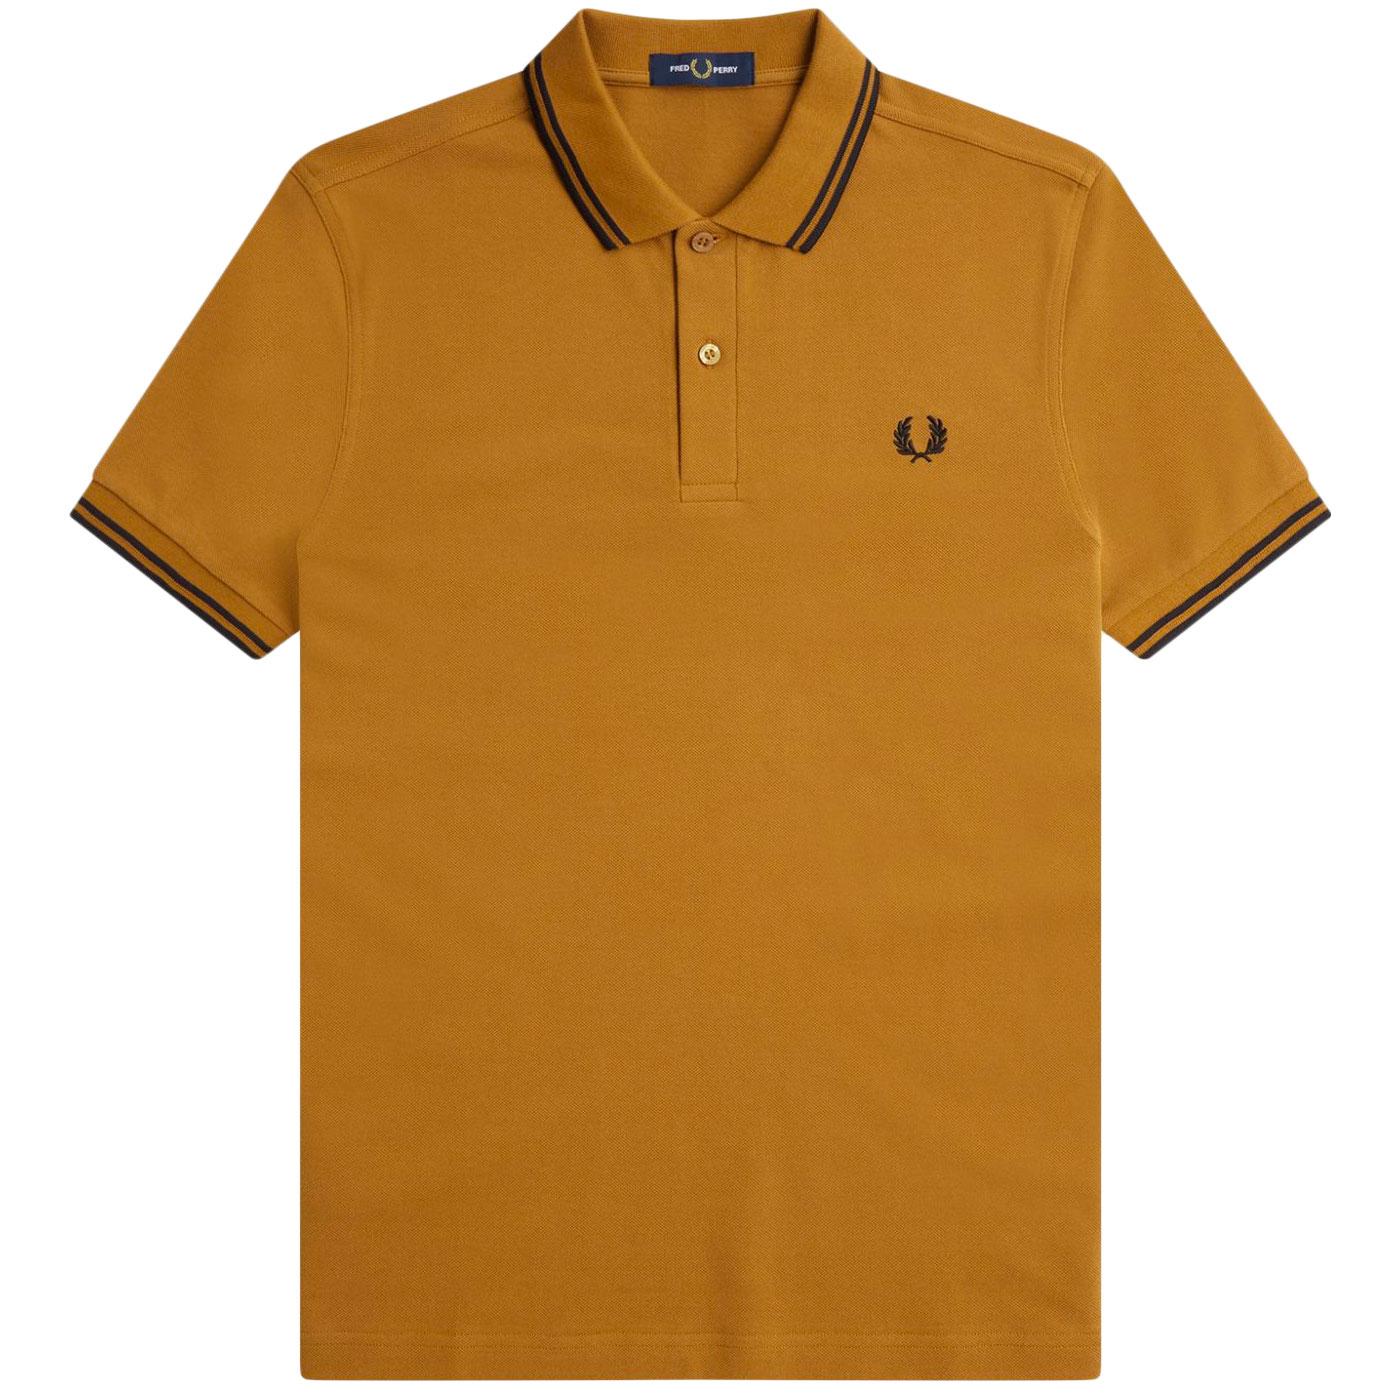 FRED PERRY M3600 Mod Twin Tipped Polo Shirt DC/B